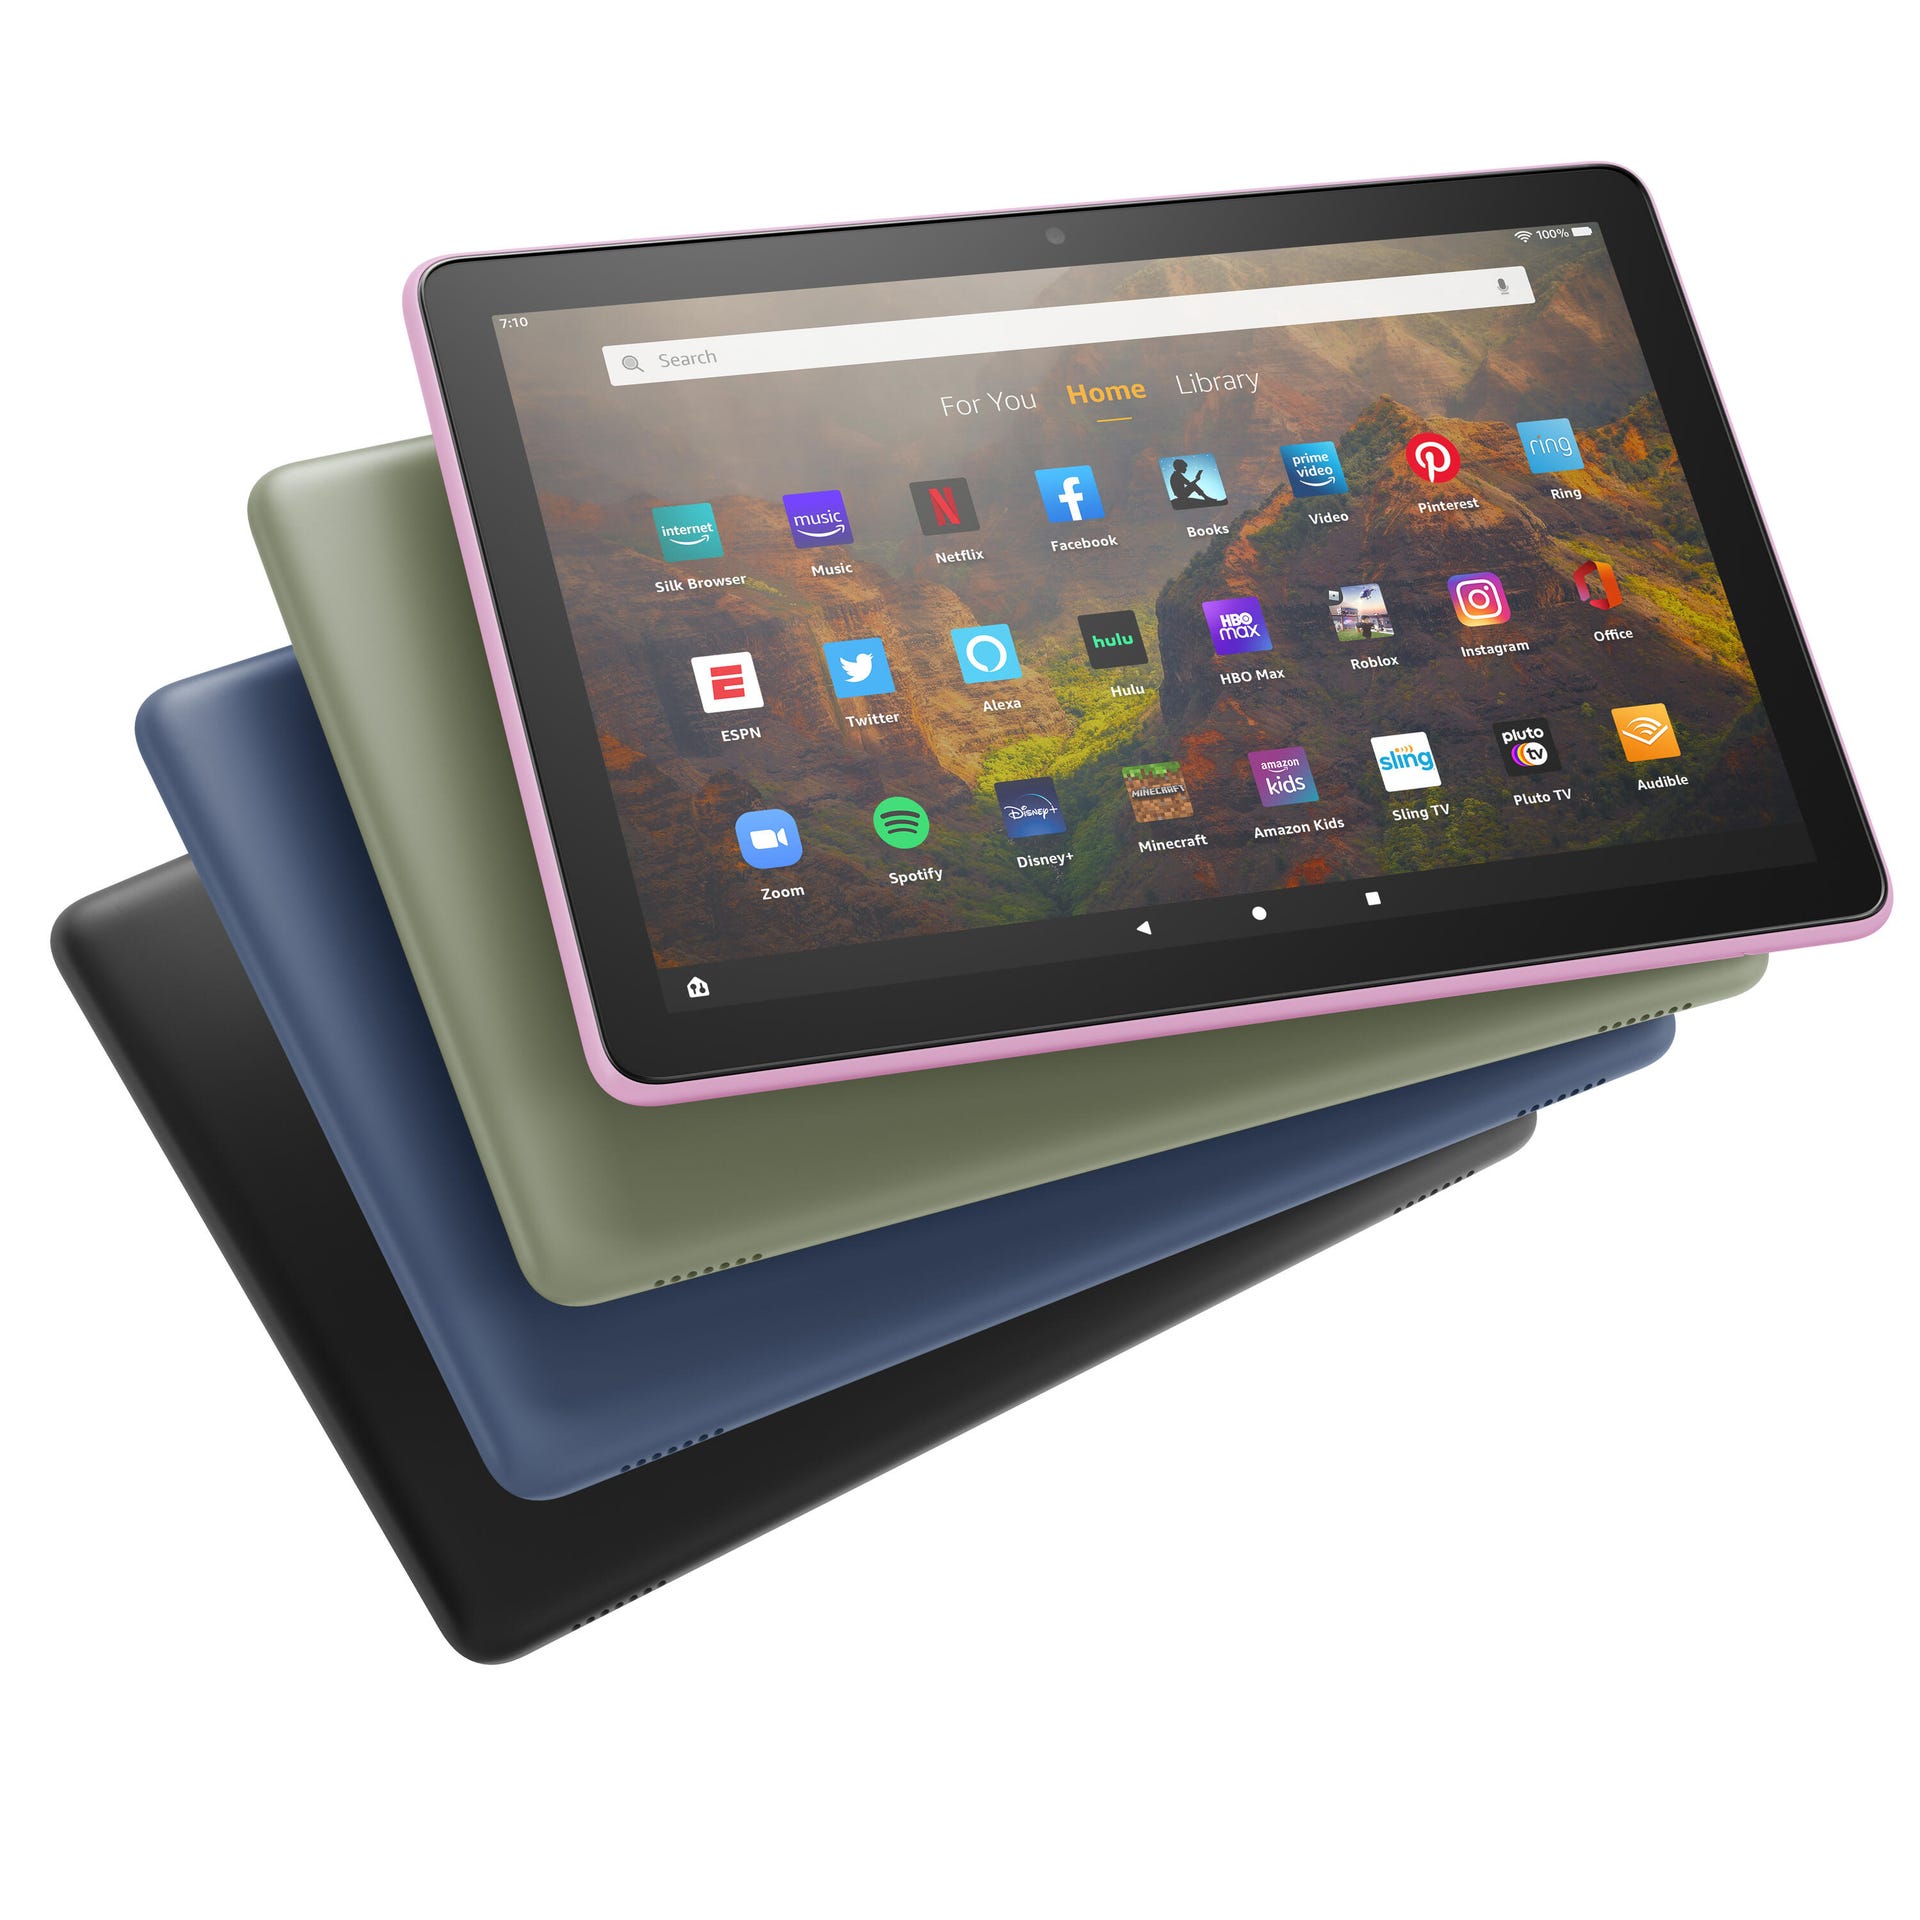 New  Fire 7 tablet is available for preorder